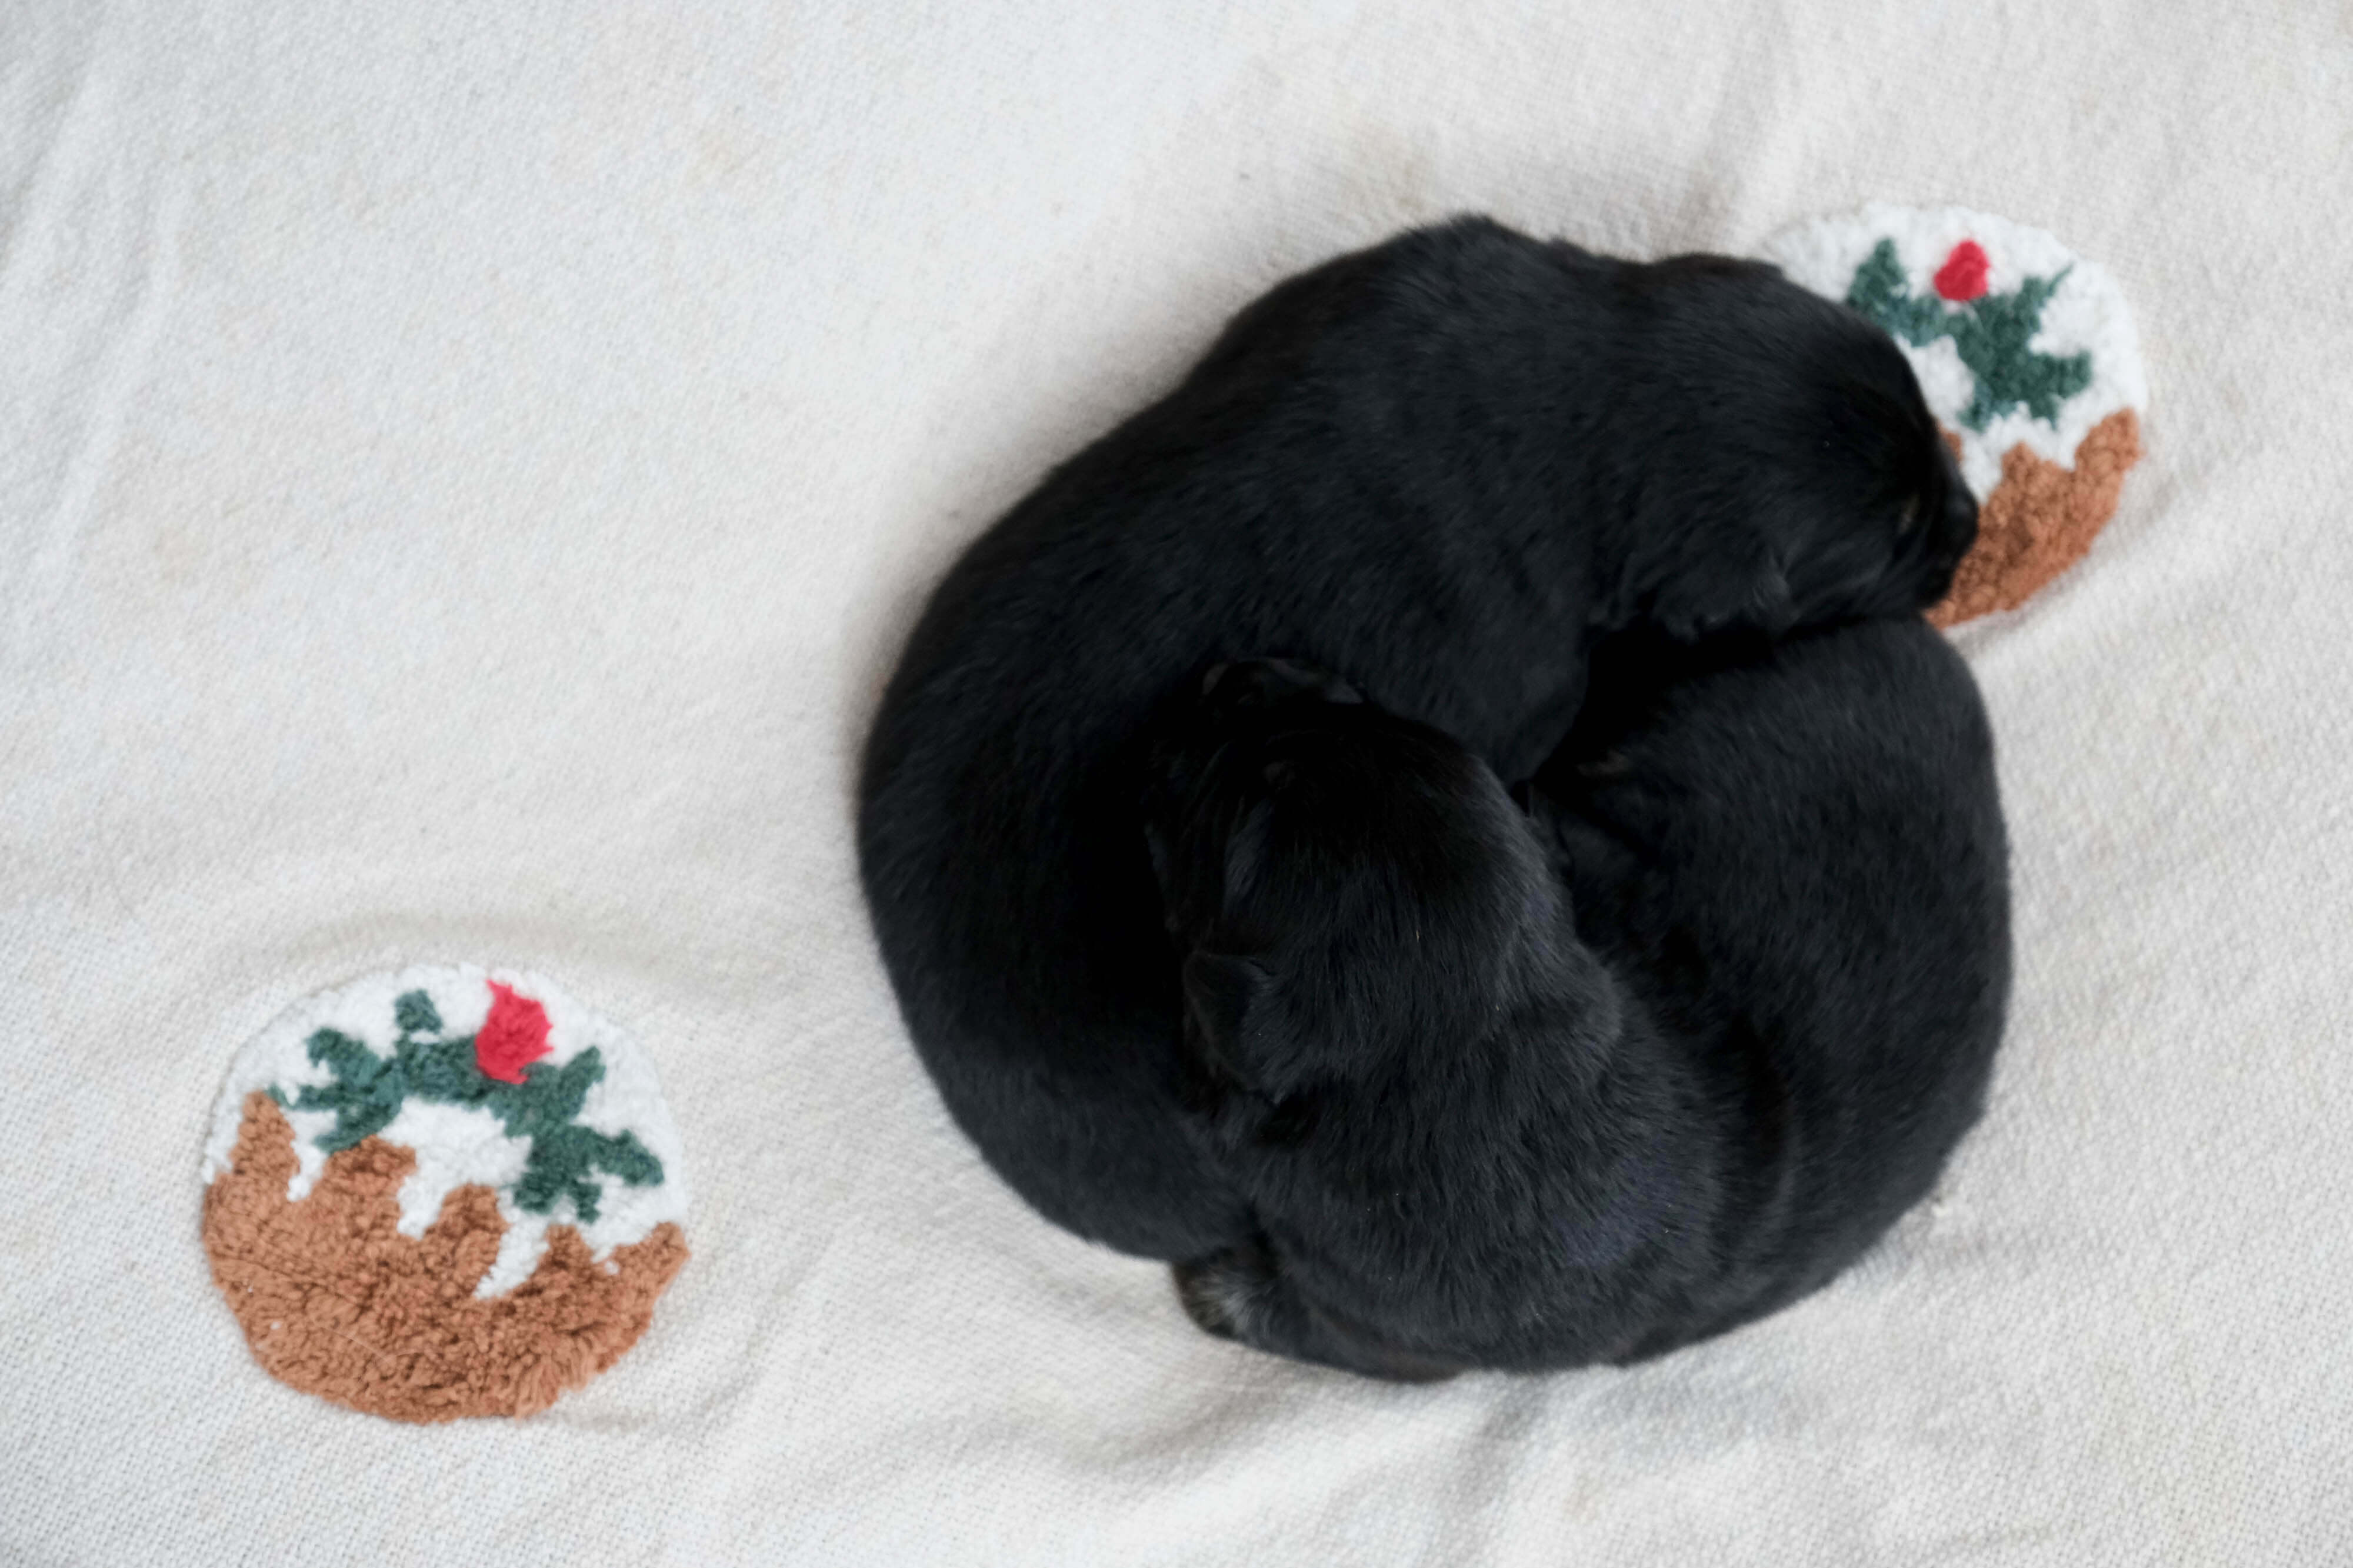 Two black puppies curl together on a cream blanket decorated with Christmas puddings